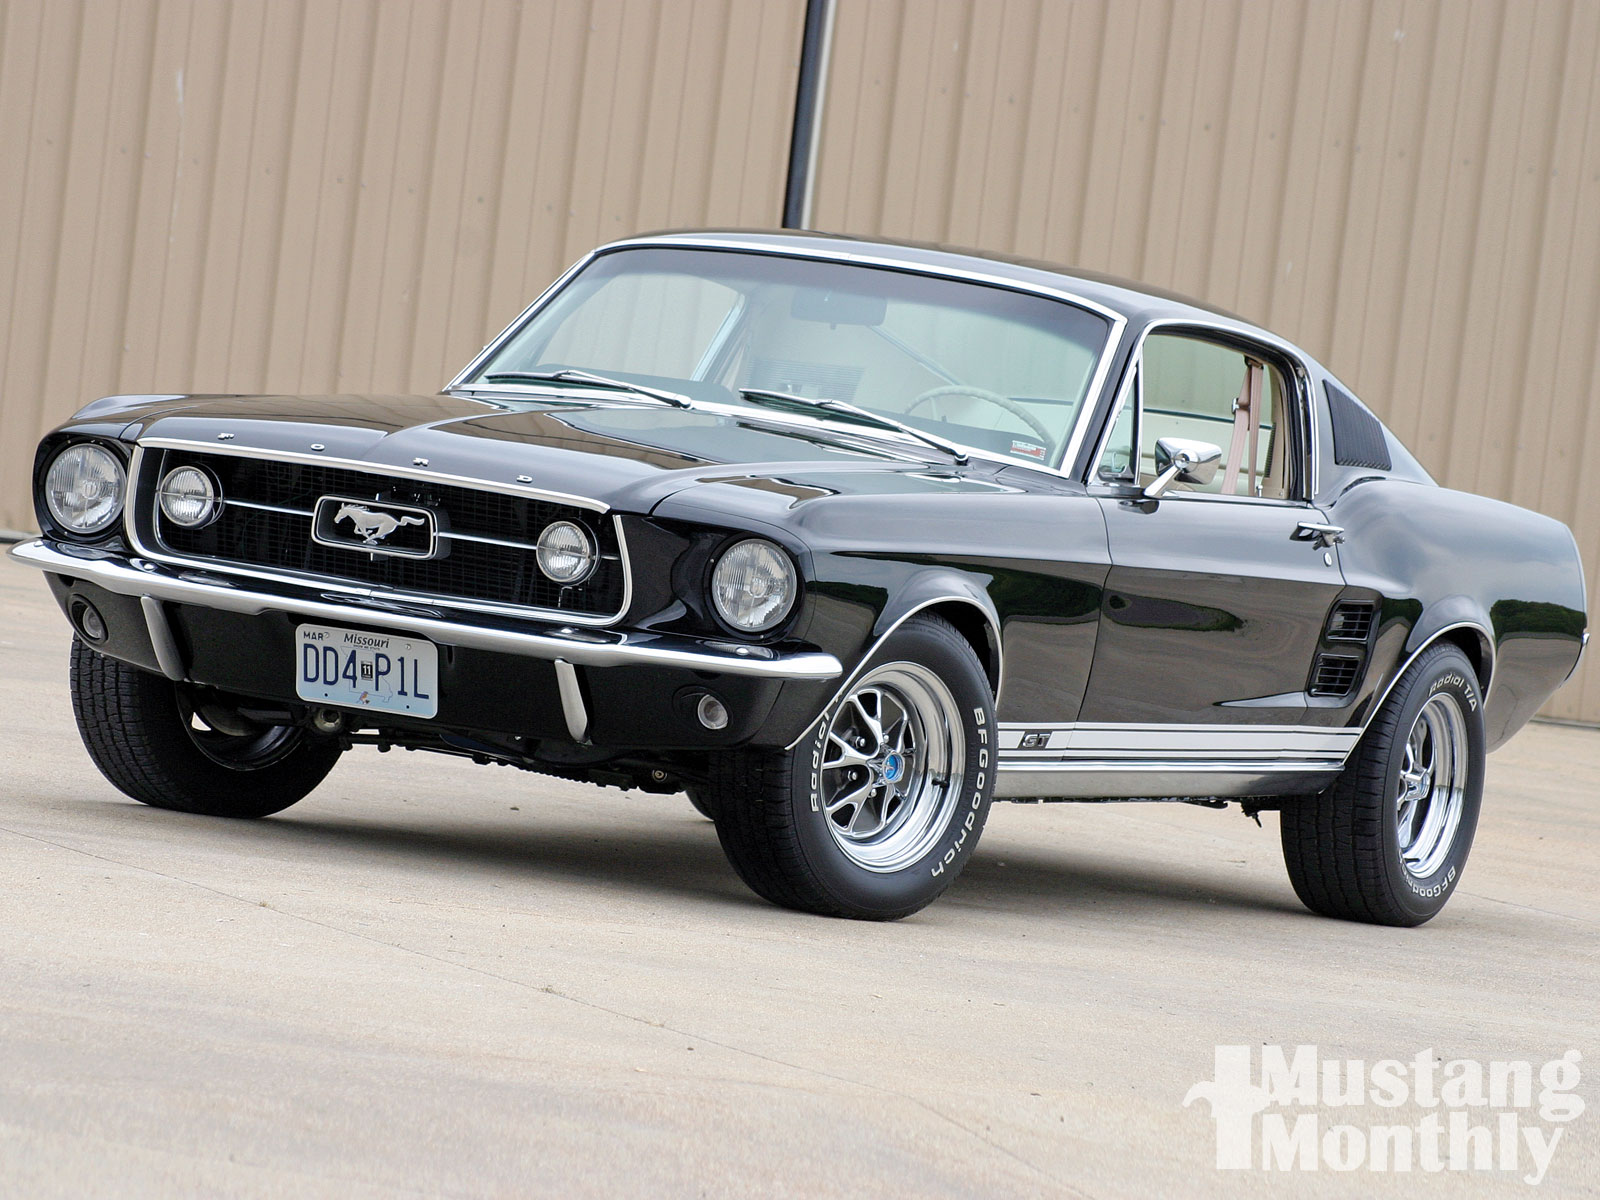 1967 Ford Mustang GT Fastback - Clean One-Owner - Mustang Monthly Magazine